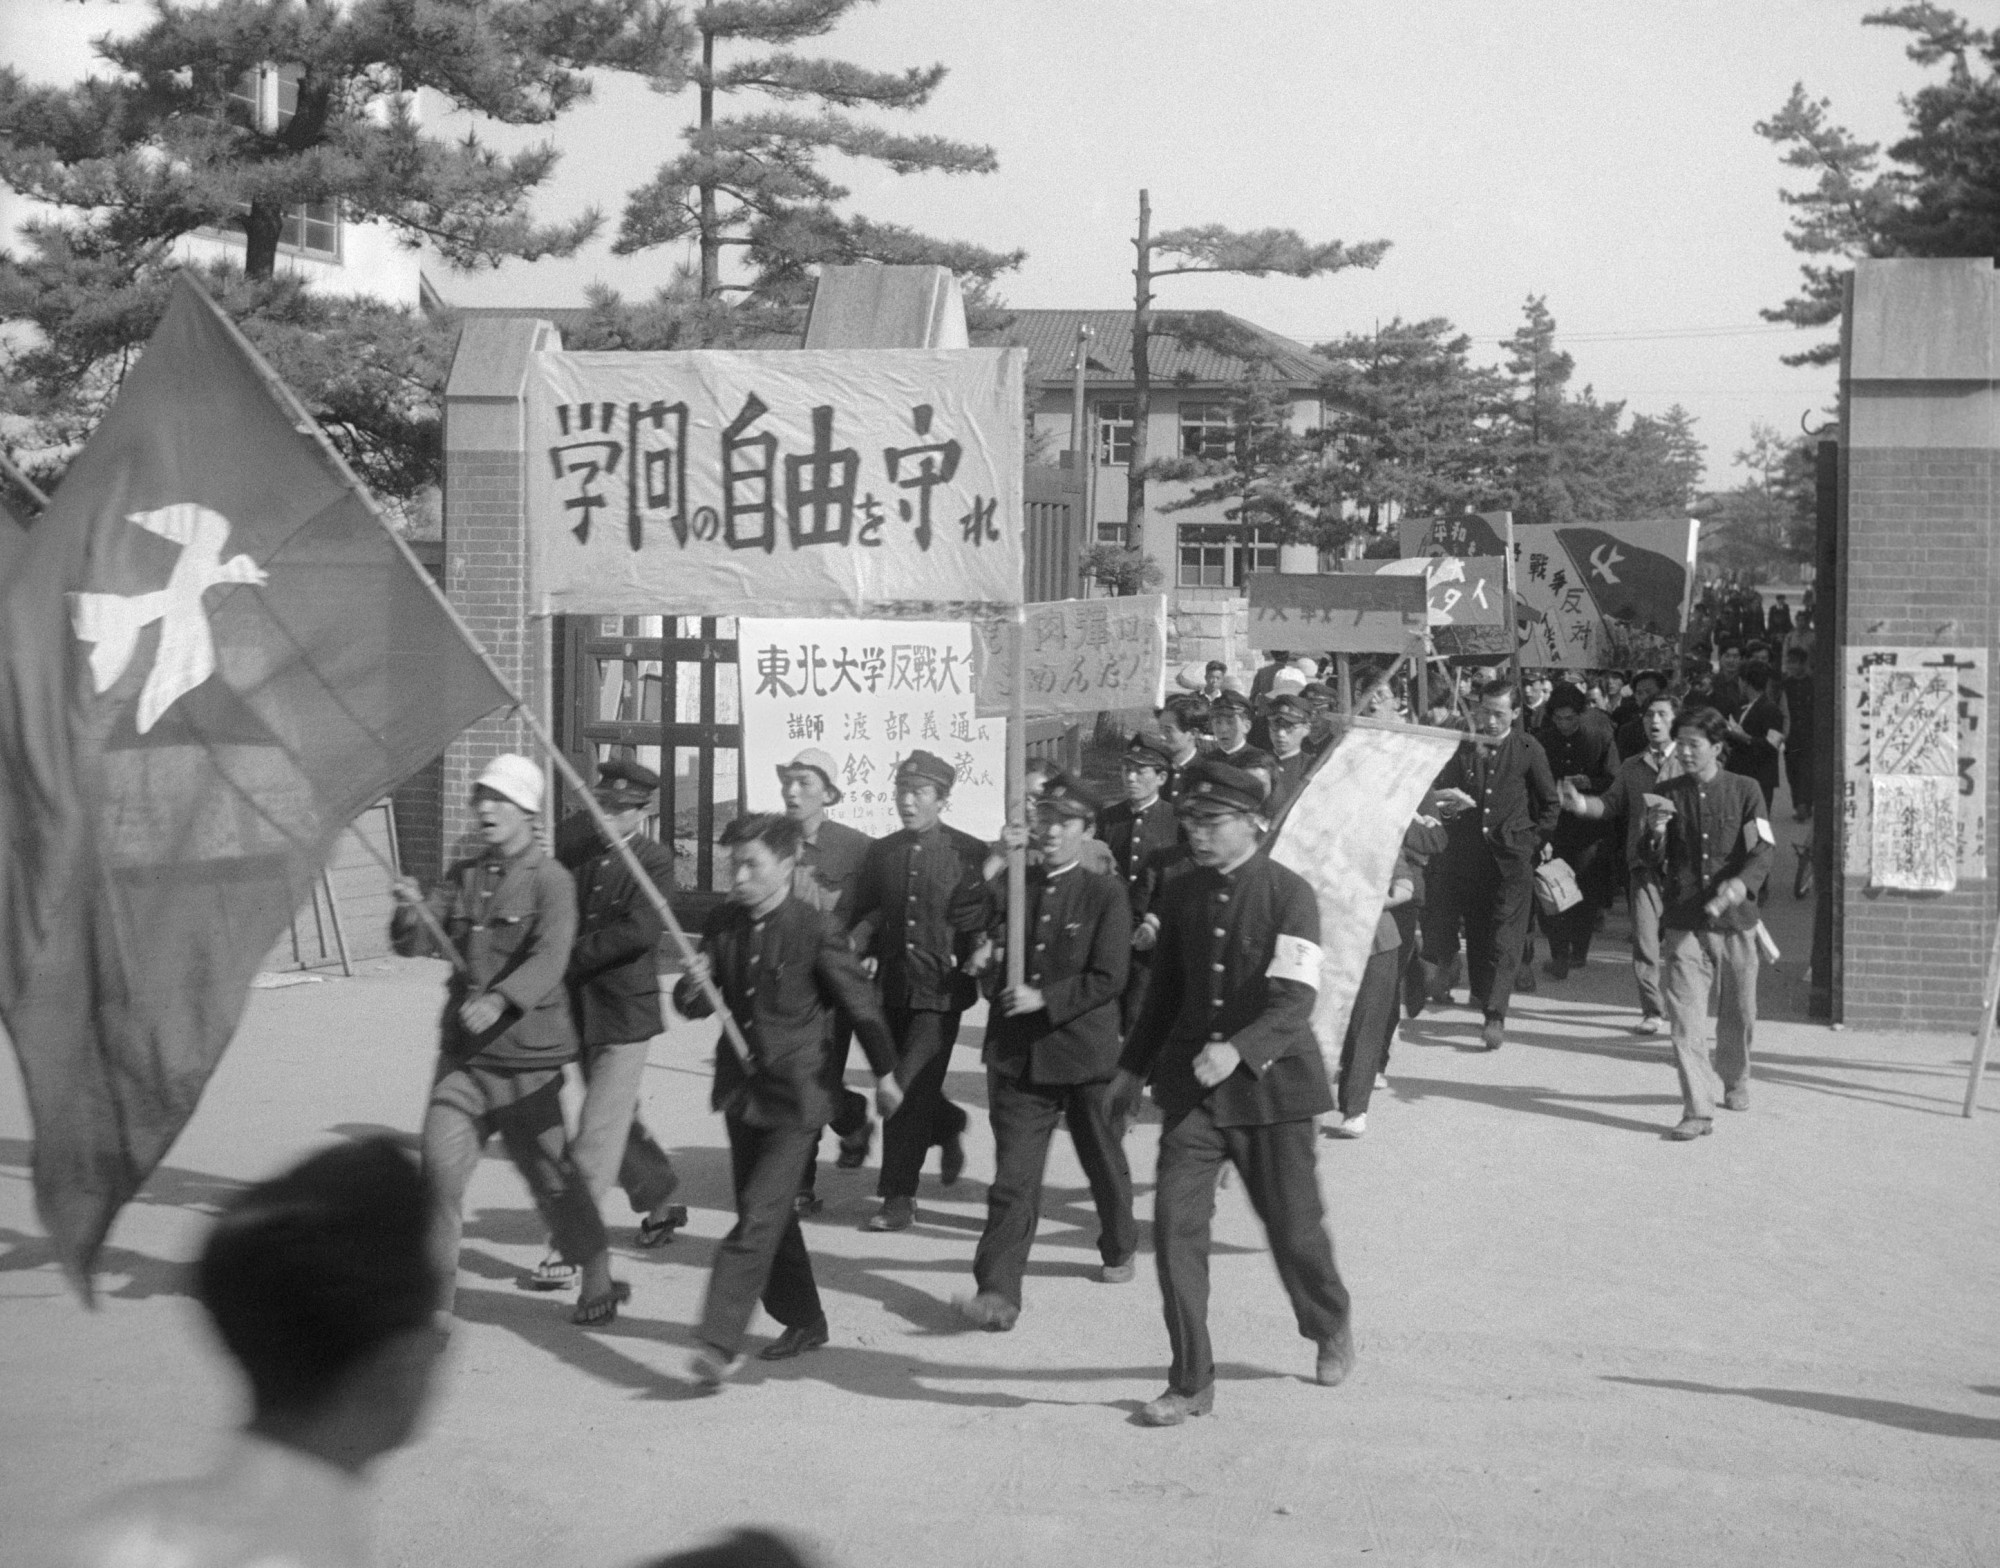 Venerable site: Students taking part in an anti-war rally file out through the gates of Tohoku University in Sendai in 1950. The storied university recently revealed that it plans not to renew the fixed-term contracts of up to 3,200 employees, thereby ensuring that they will not be able to become regular staff according to a recent revision to the Labor Contract Law. | KYODO